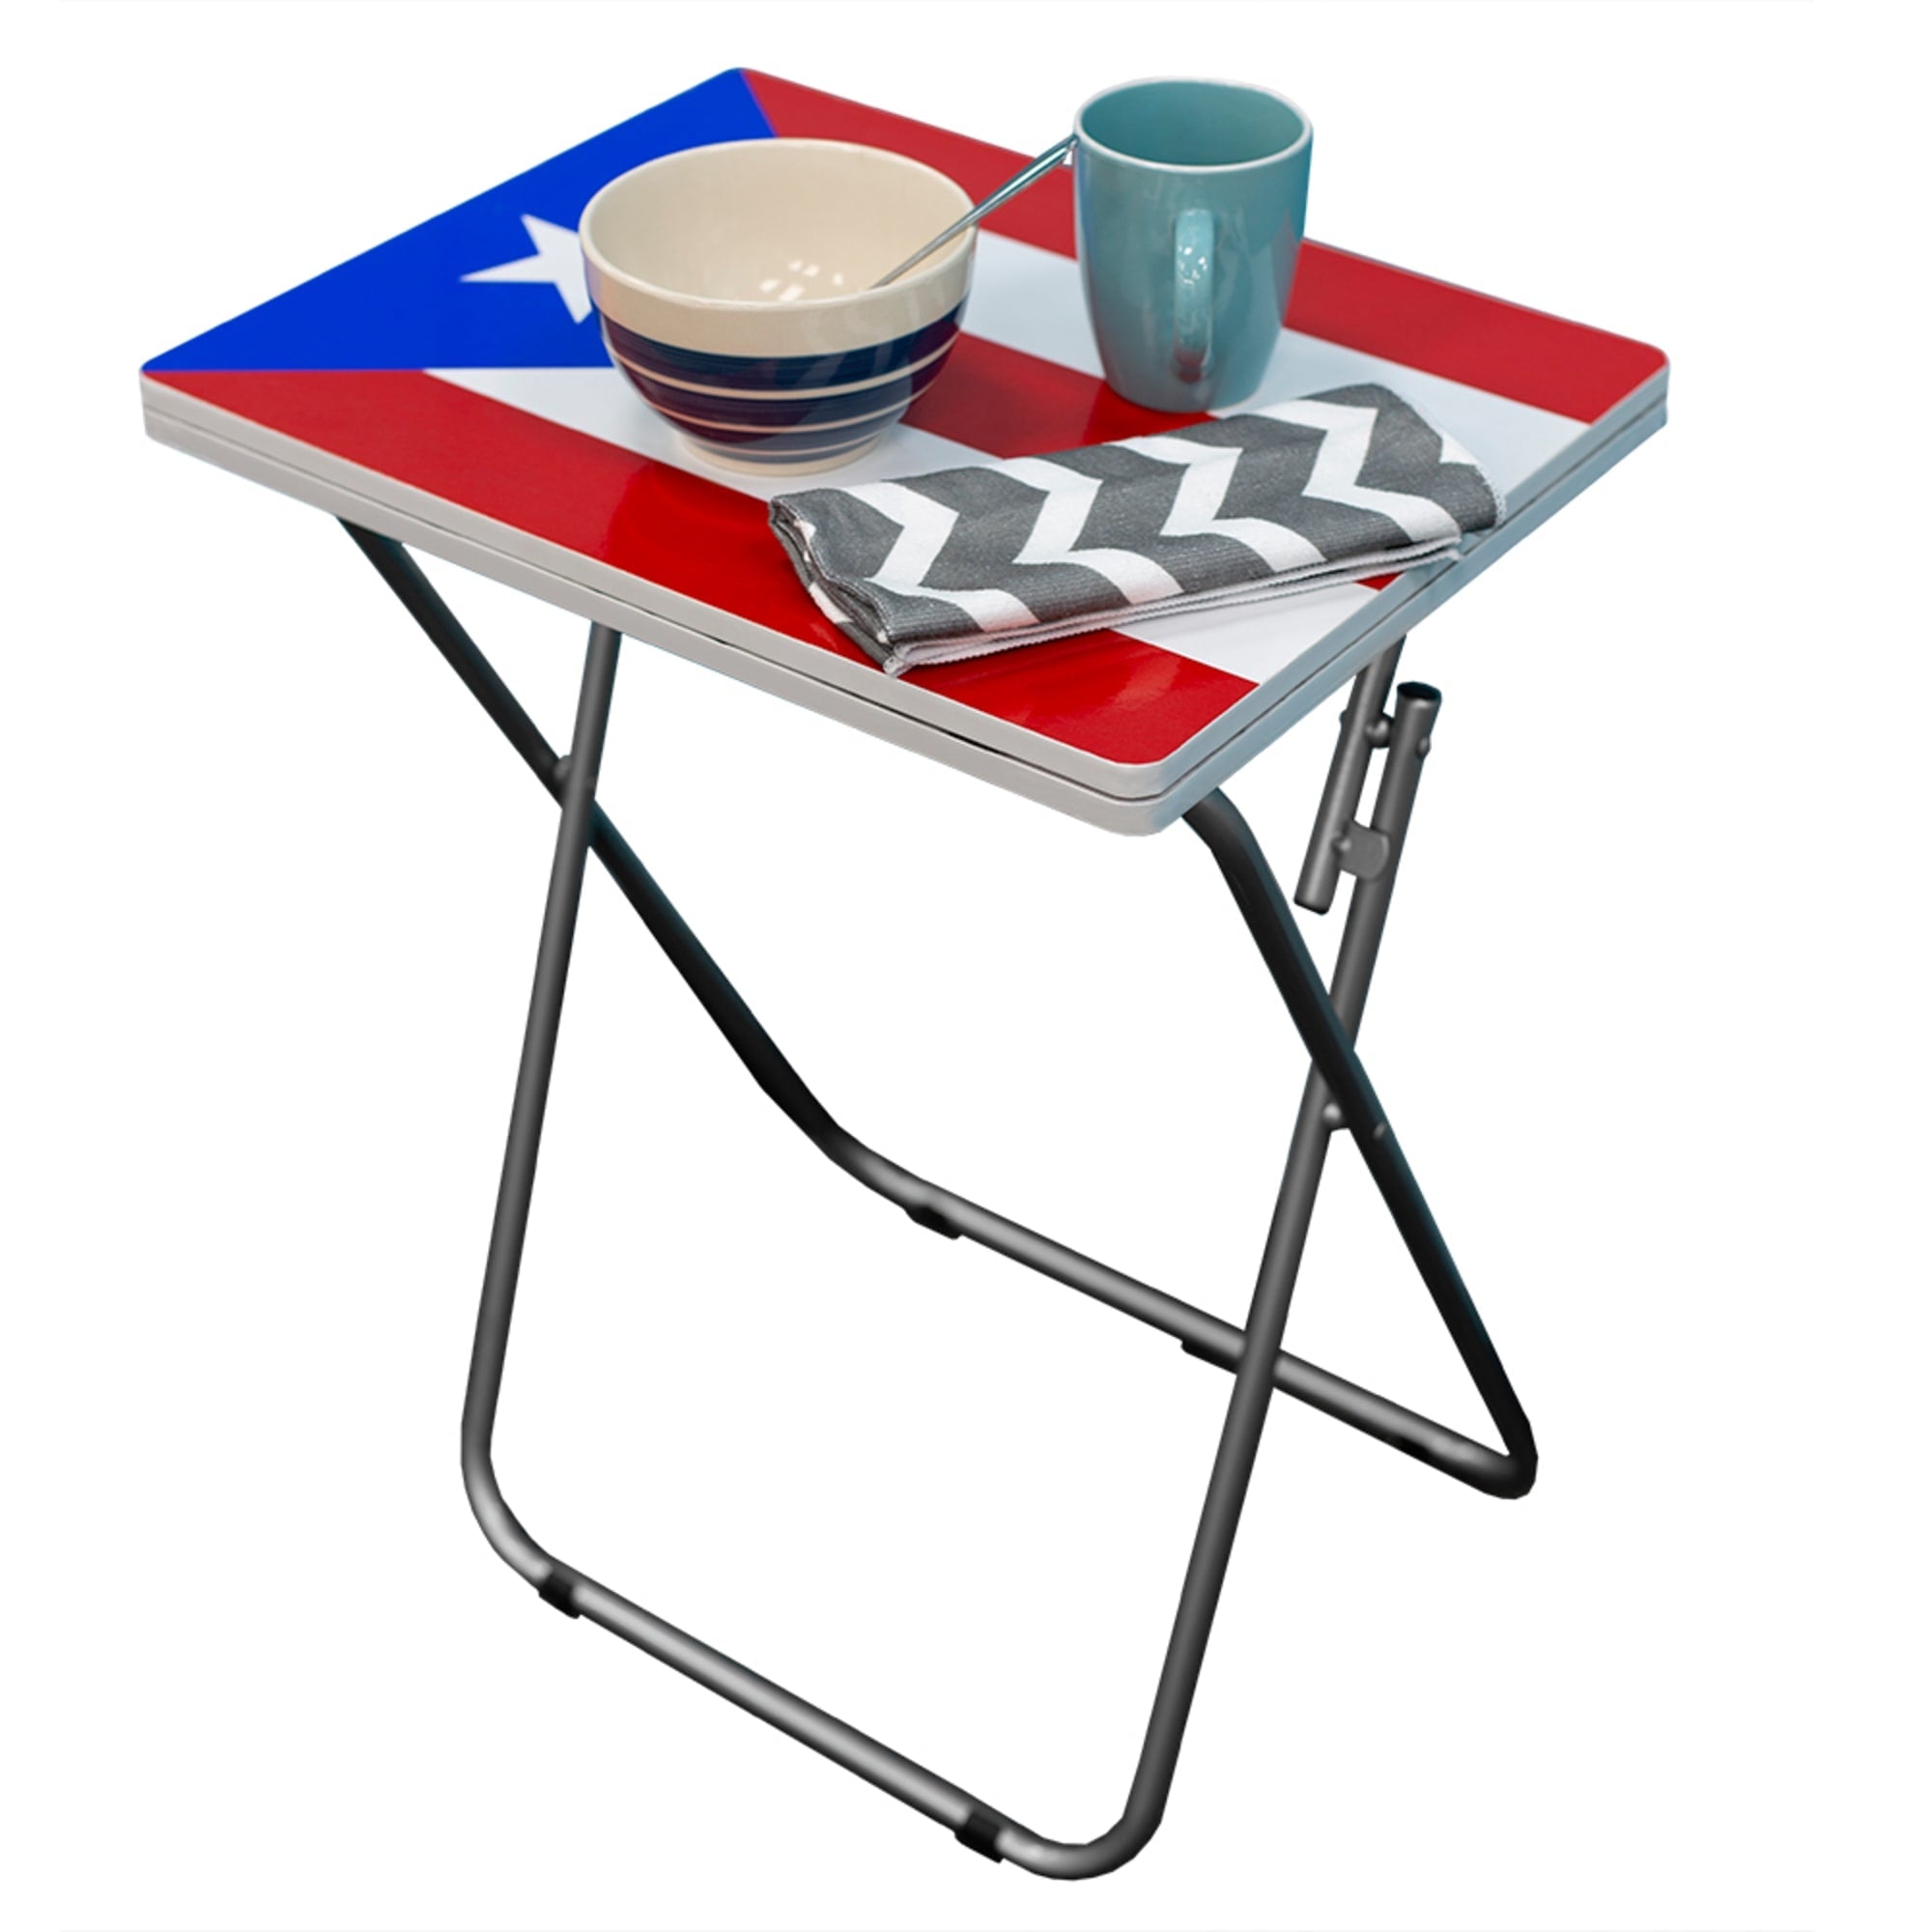 Home Basics Puerto Rican Flag Multi-Purpose Table, Silver $15.00 EACH, CASE PACK OF 6